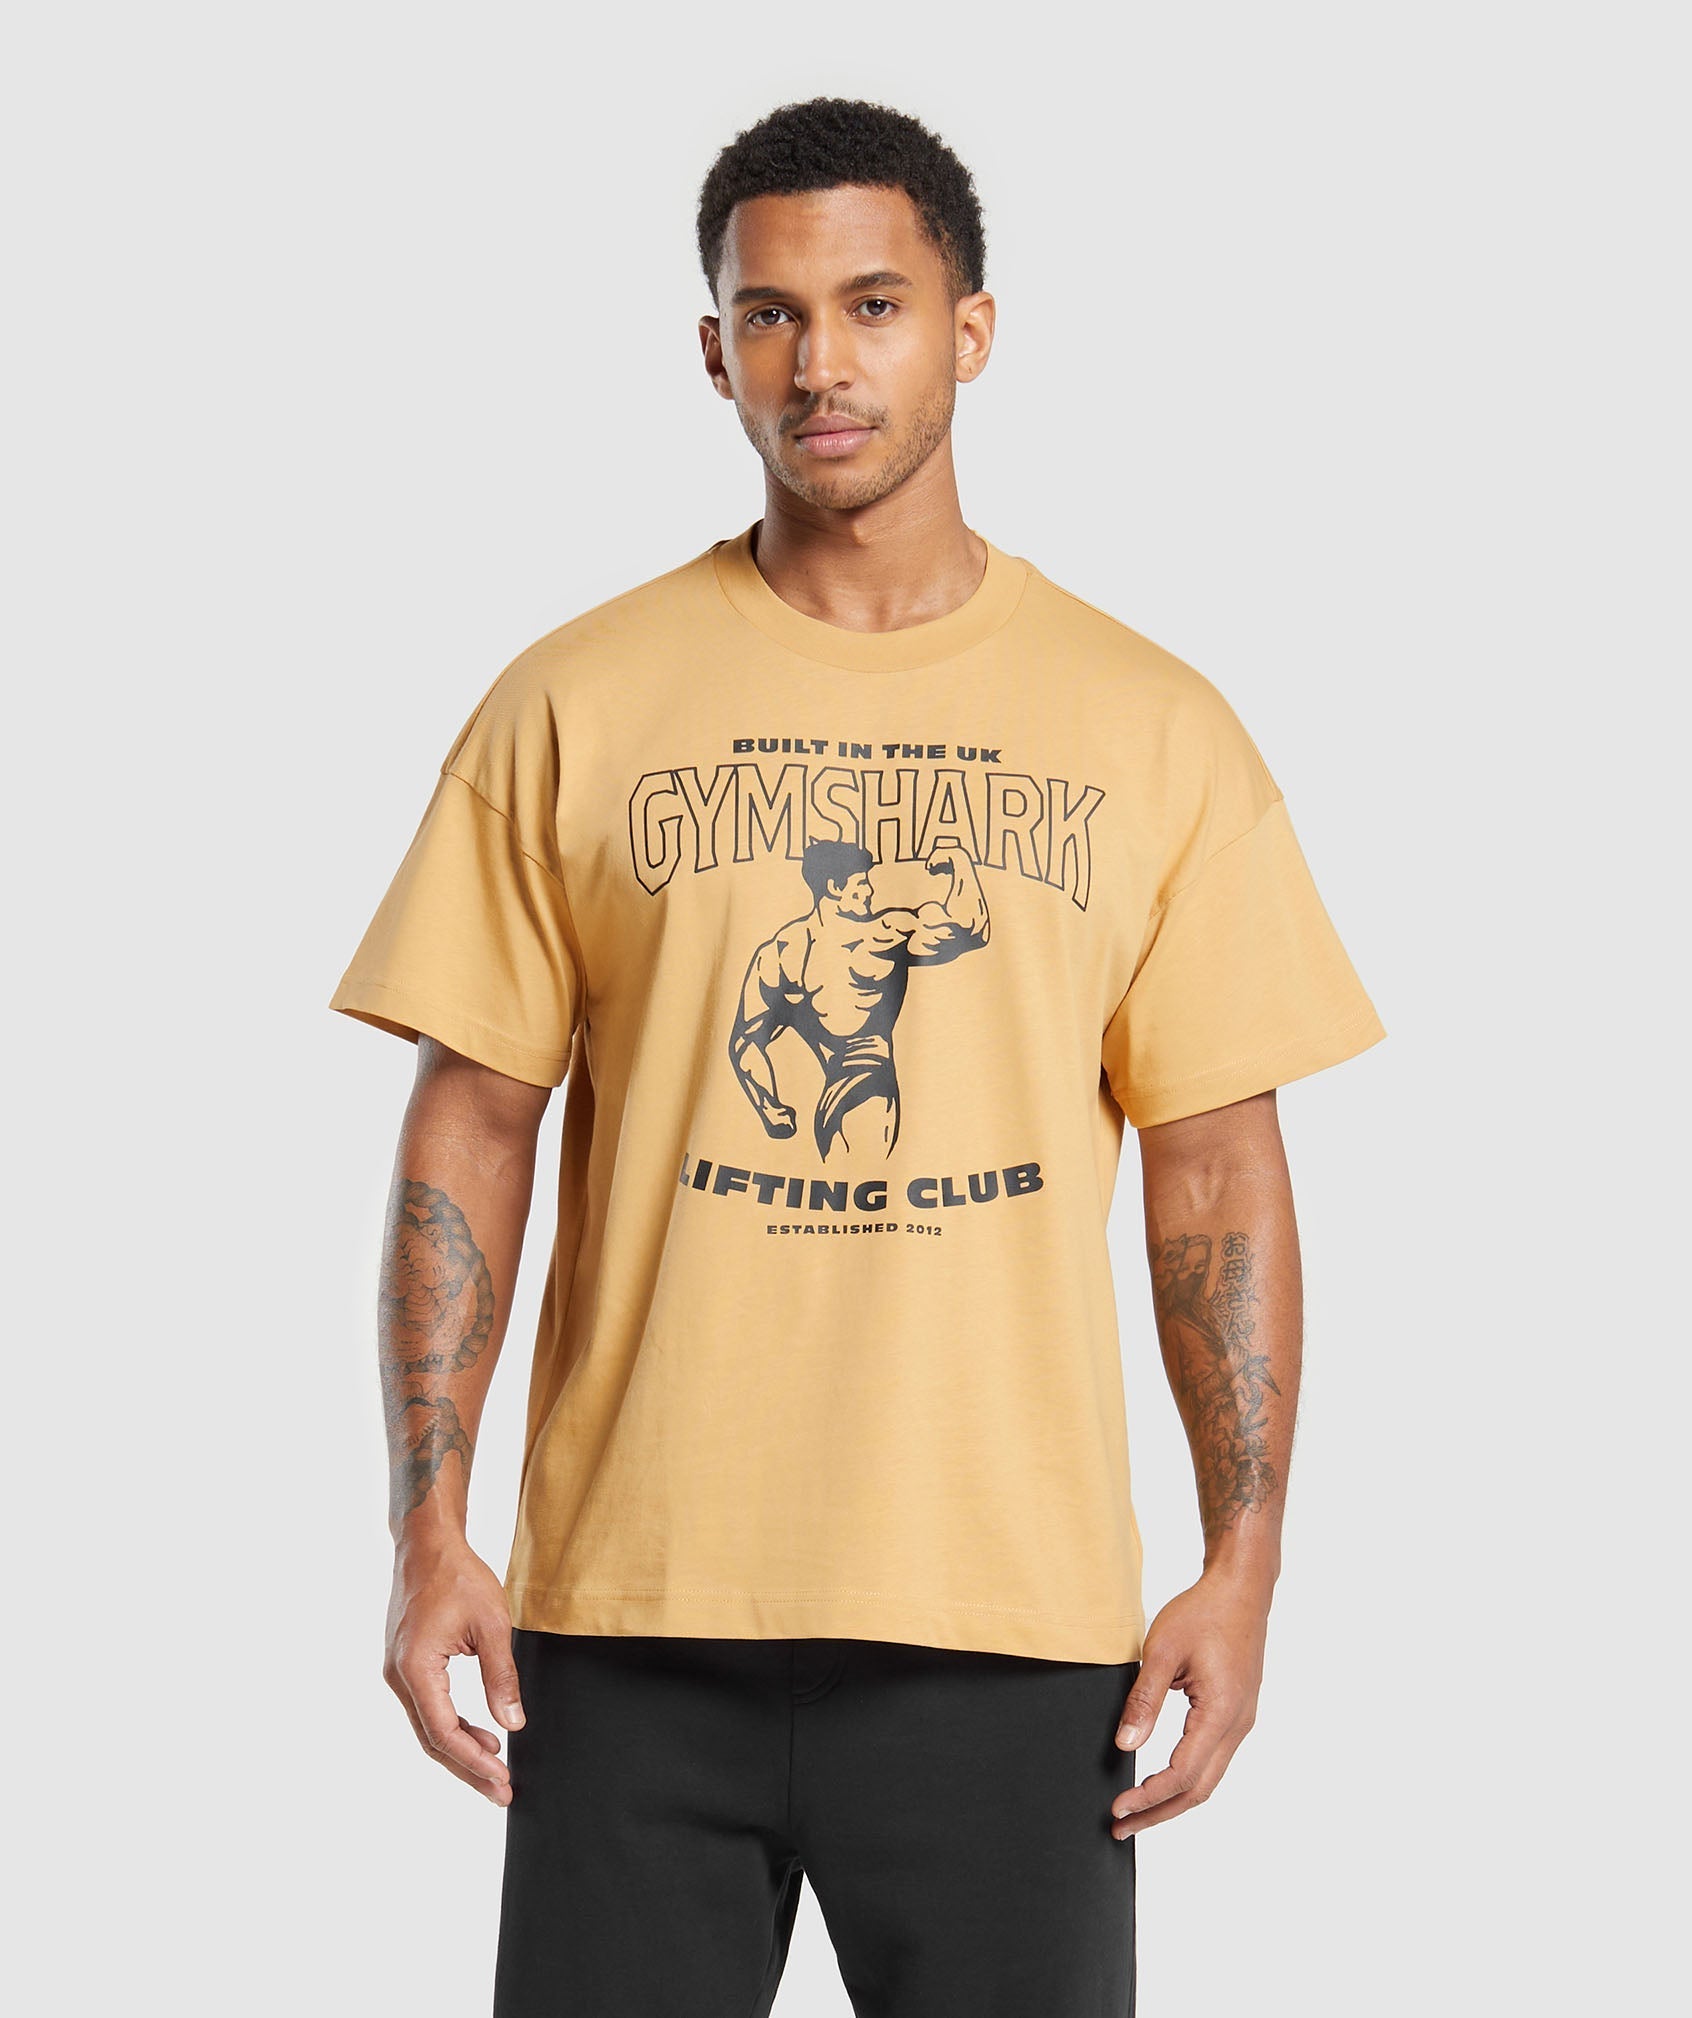 Built in the UK T-Shirt in Rustic Yellow - view 1